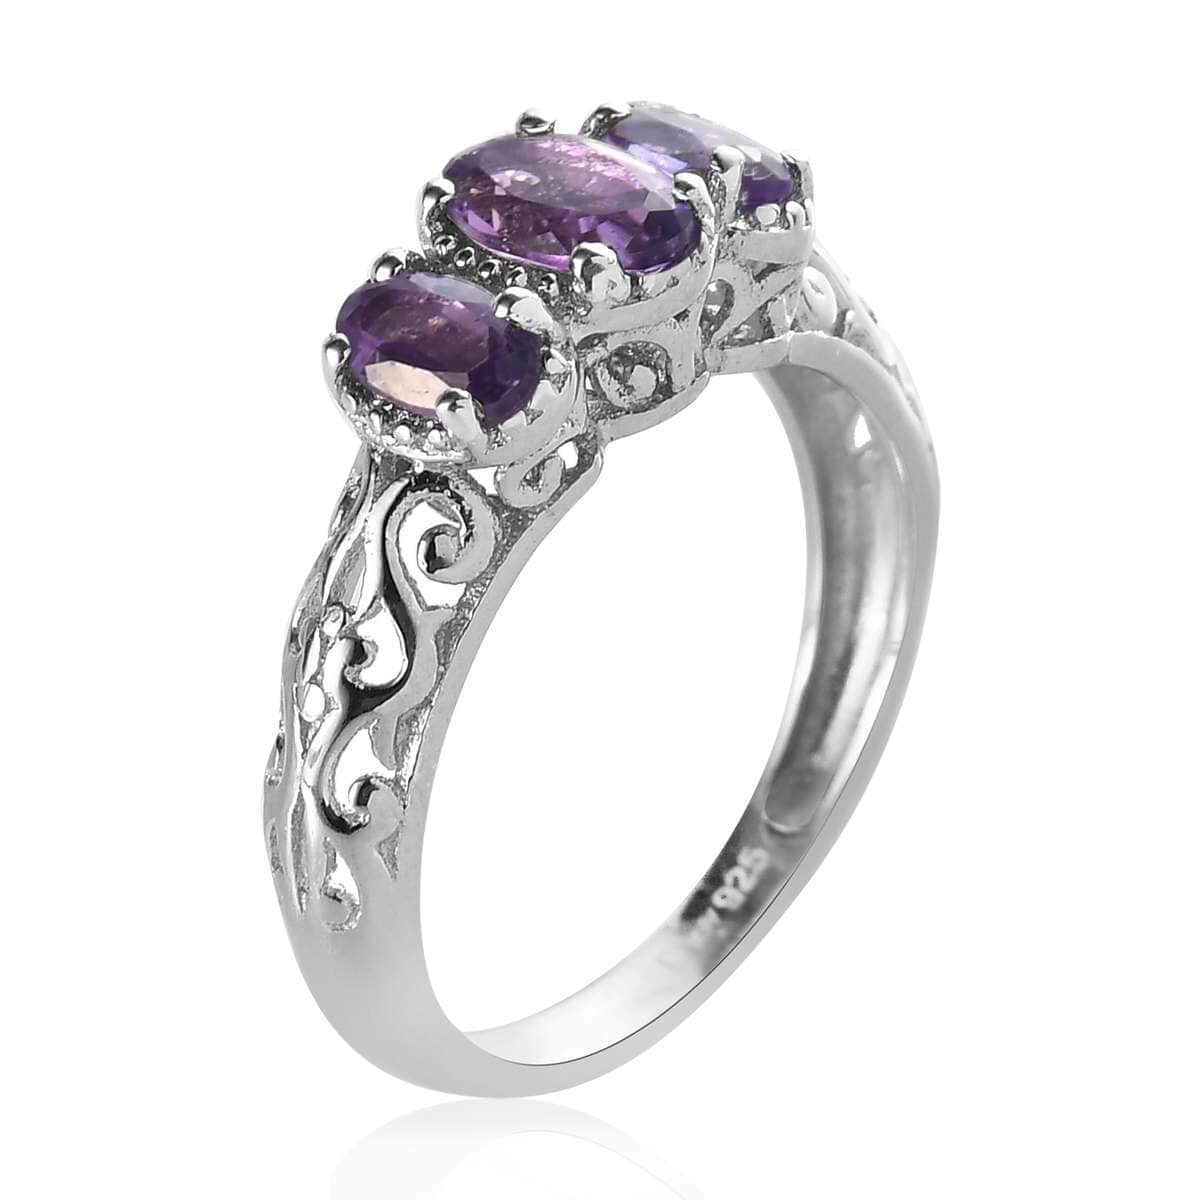 Amethyst Ring, 3 Stone Amethyst Ring, Trilogy Ring, Sterling Silver Ring, Birthstone Jewelry, Amethyst 3 Stone Ring 0.85 ctw (Size 10.0) image number 6